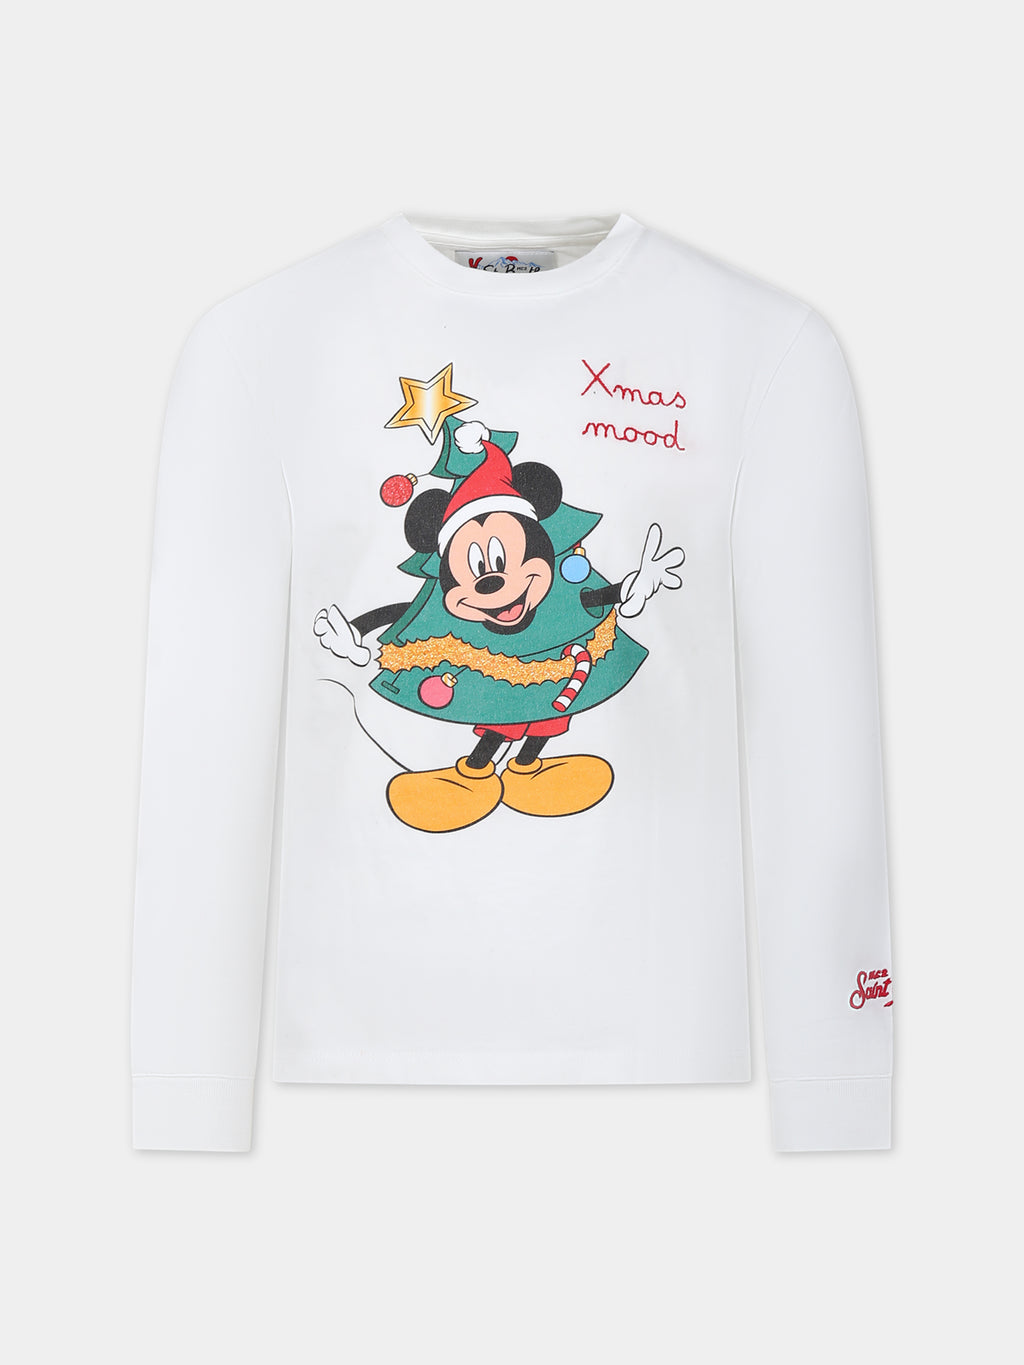 White t-shirt for baby kids with Mickey Mouse